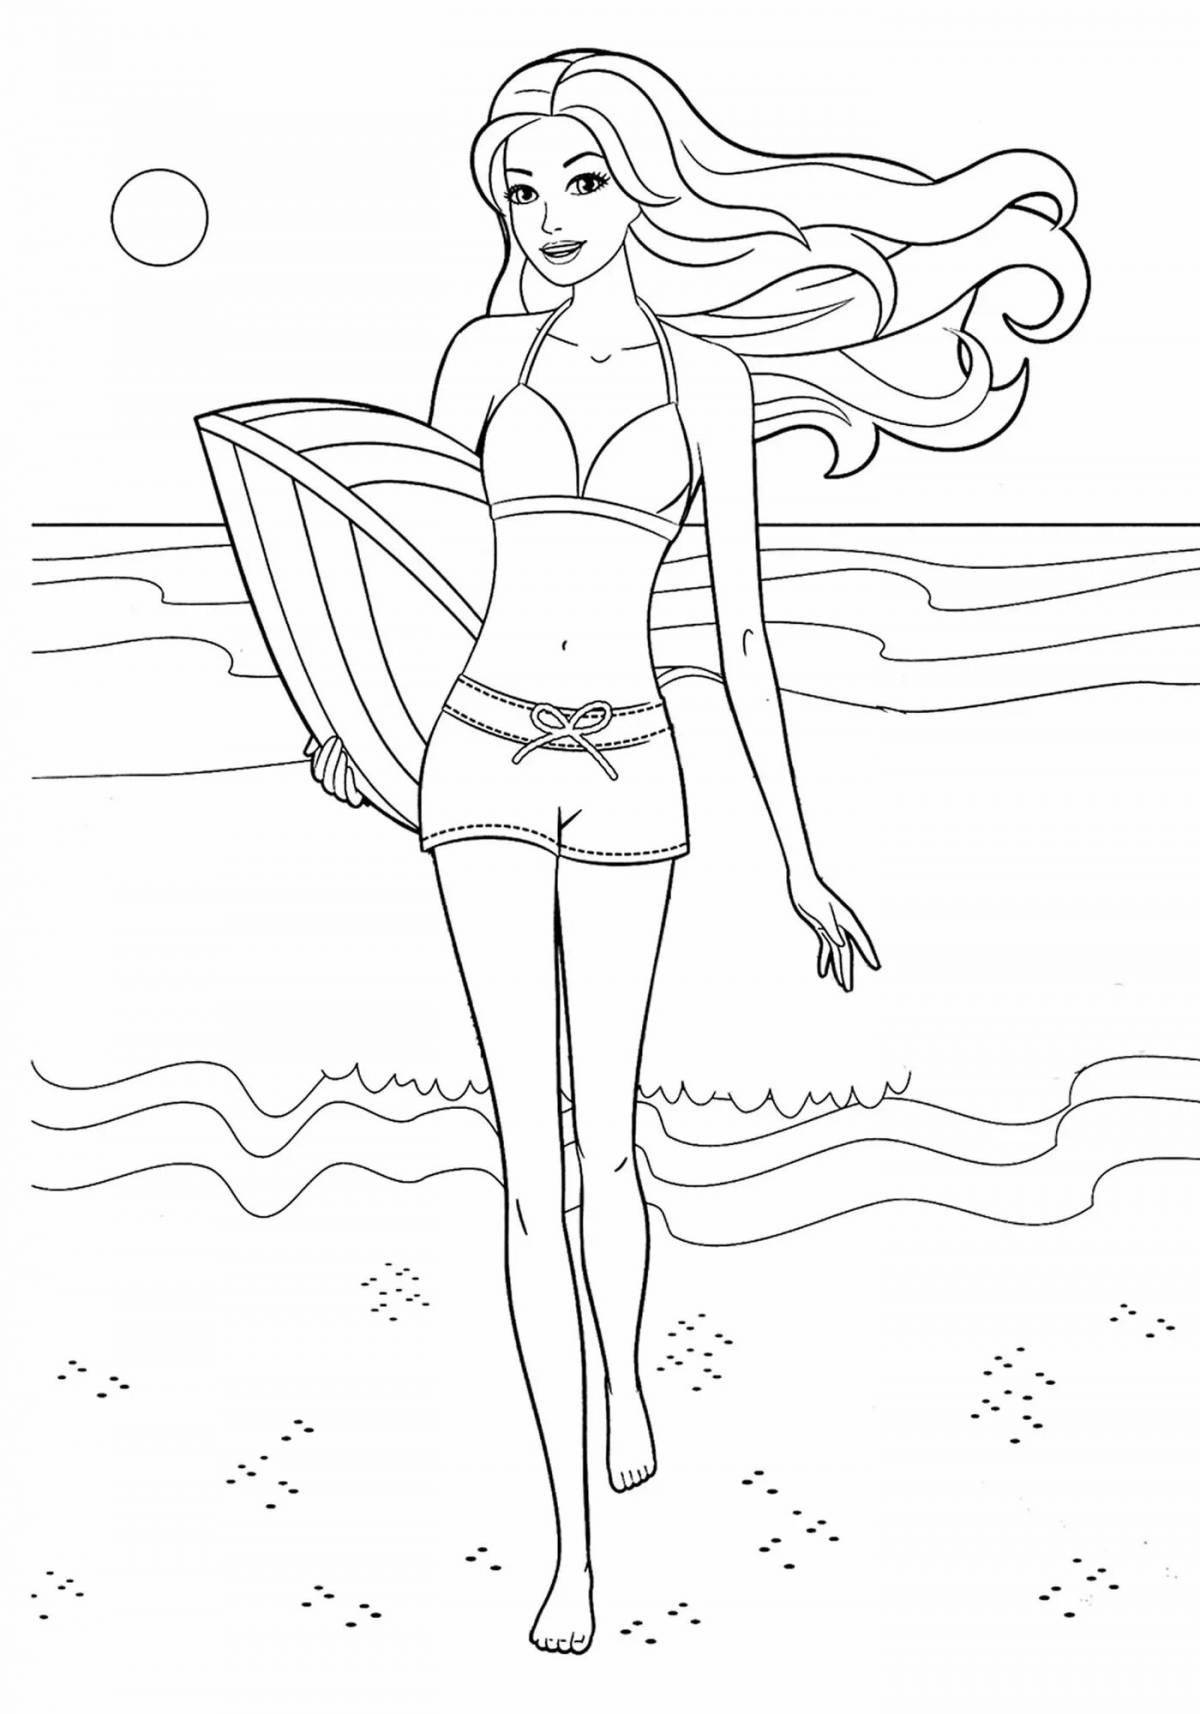 Adorable coloring book Barbie doll in a bathing suit